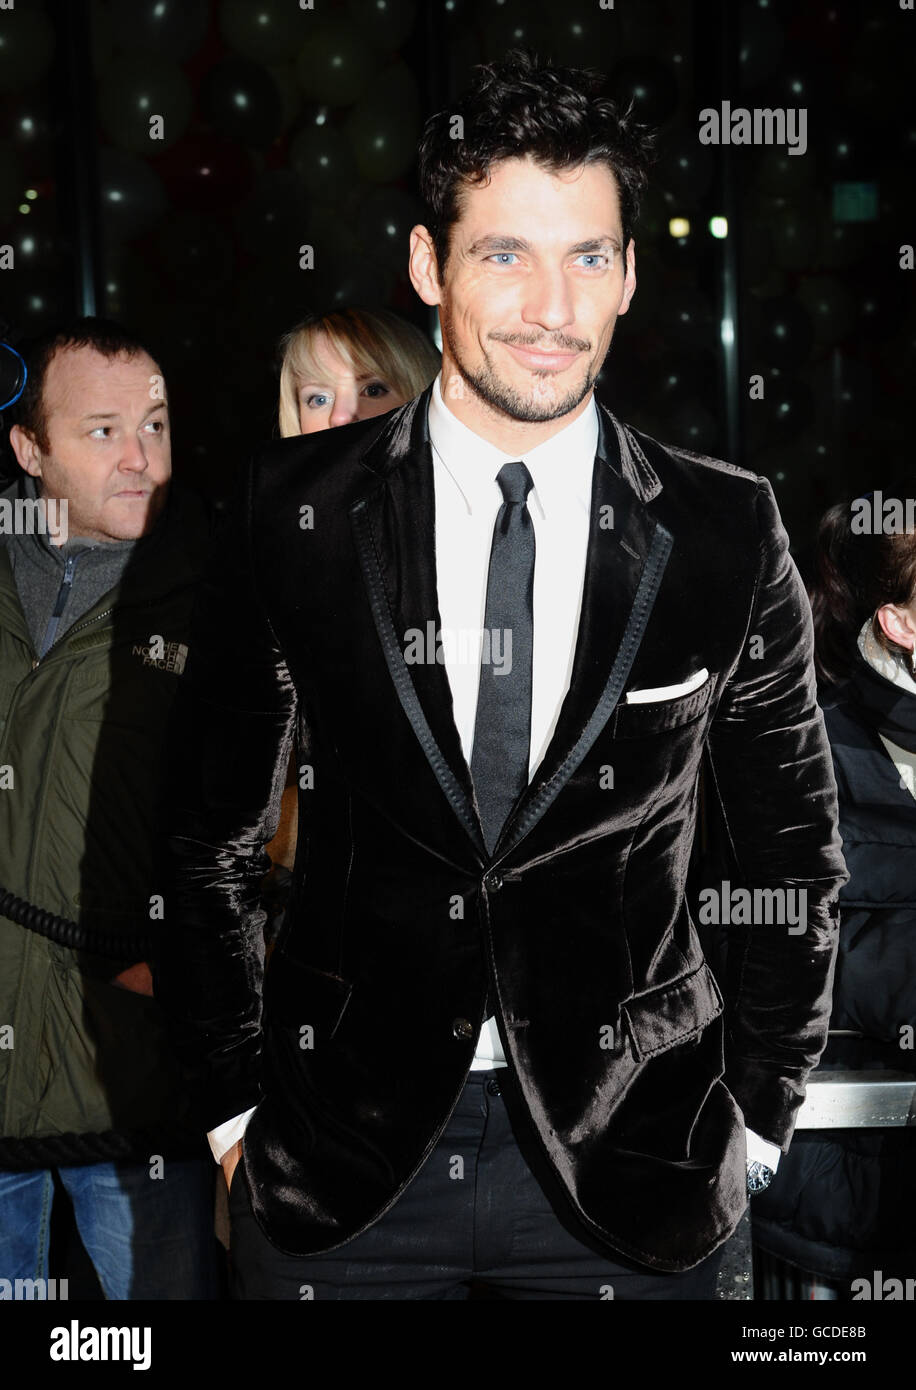 David Gandy arrives at the Love Ball at the Roundhouse in Camden. Stock Photo